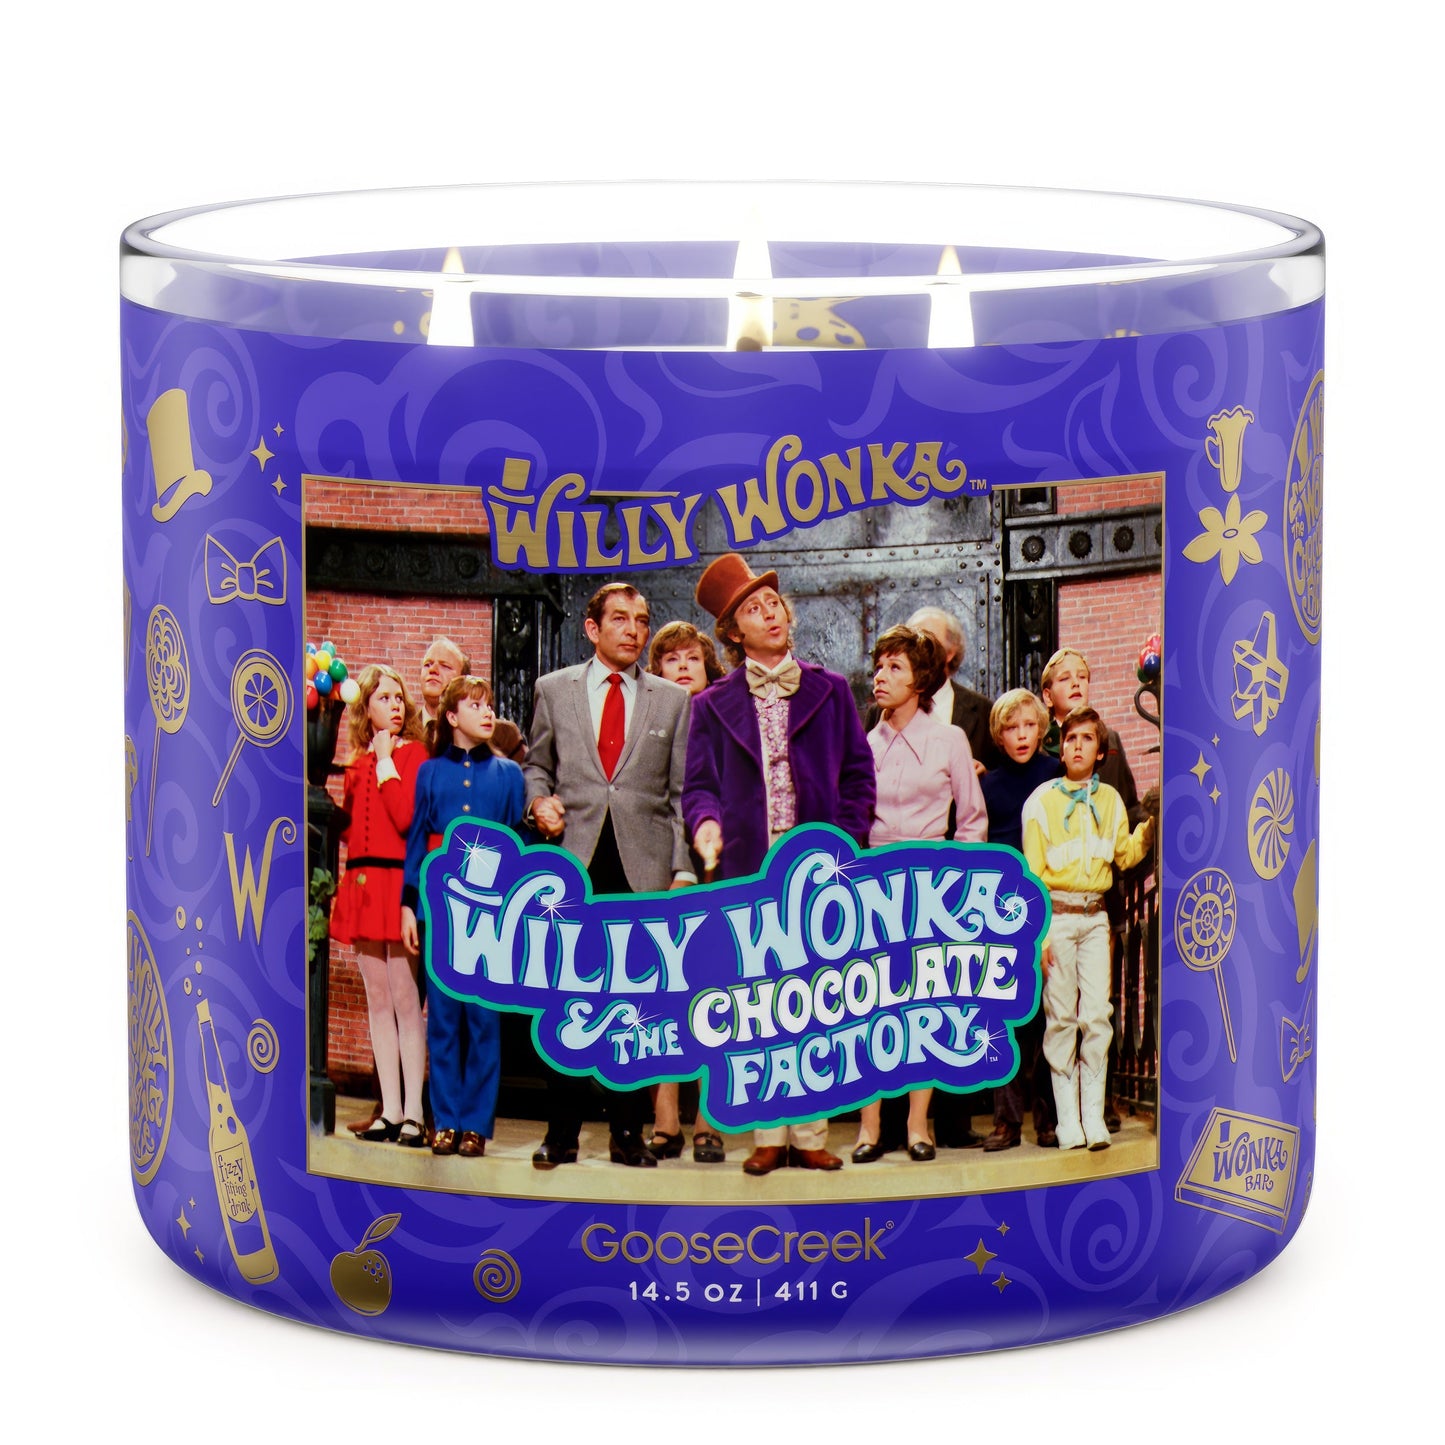 The Chocolate Factory 3-Wick Wonka Candle